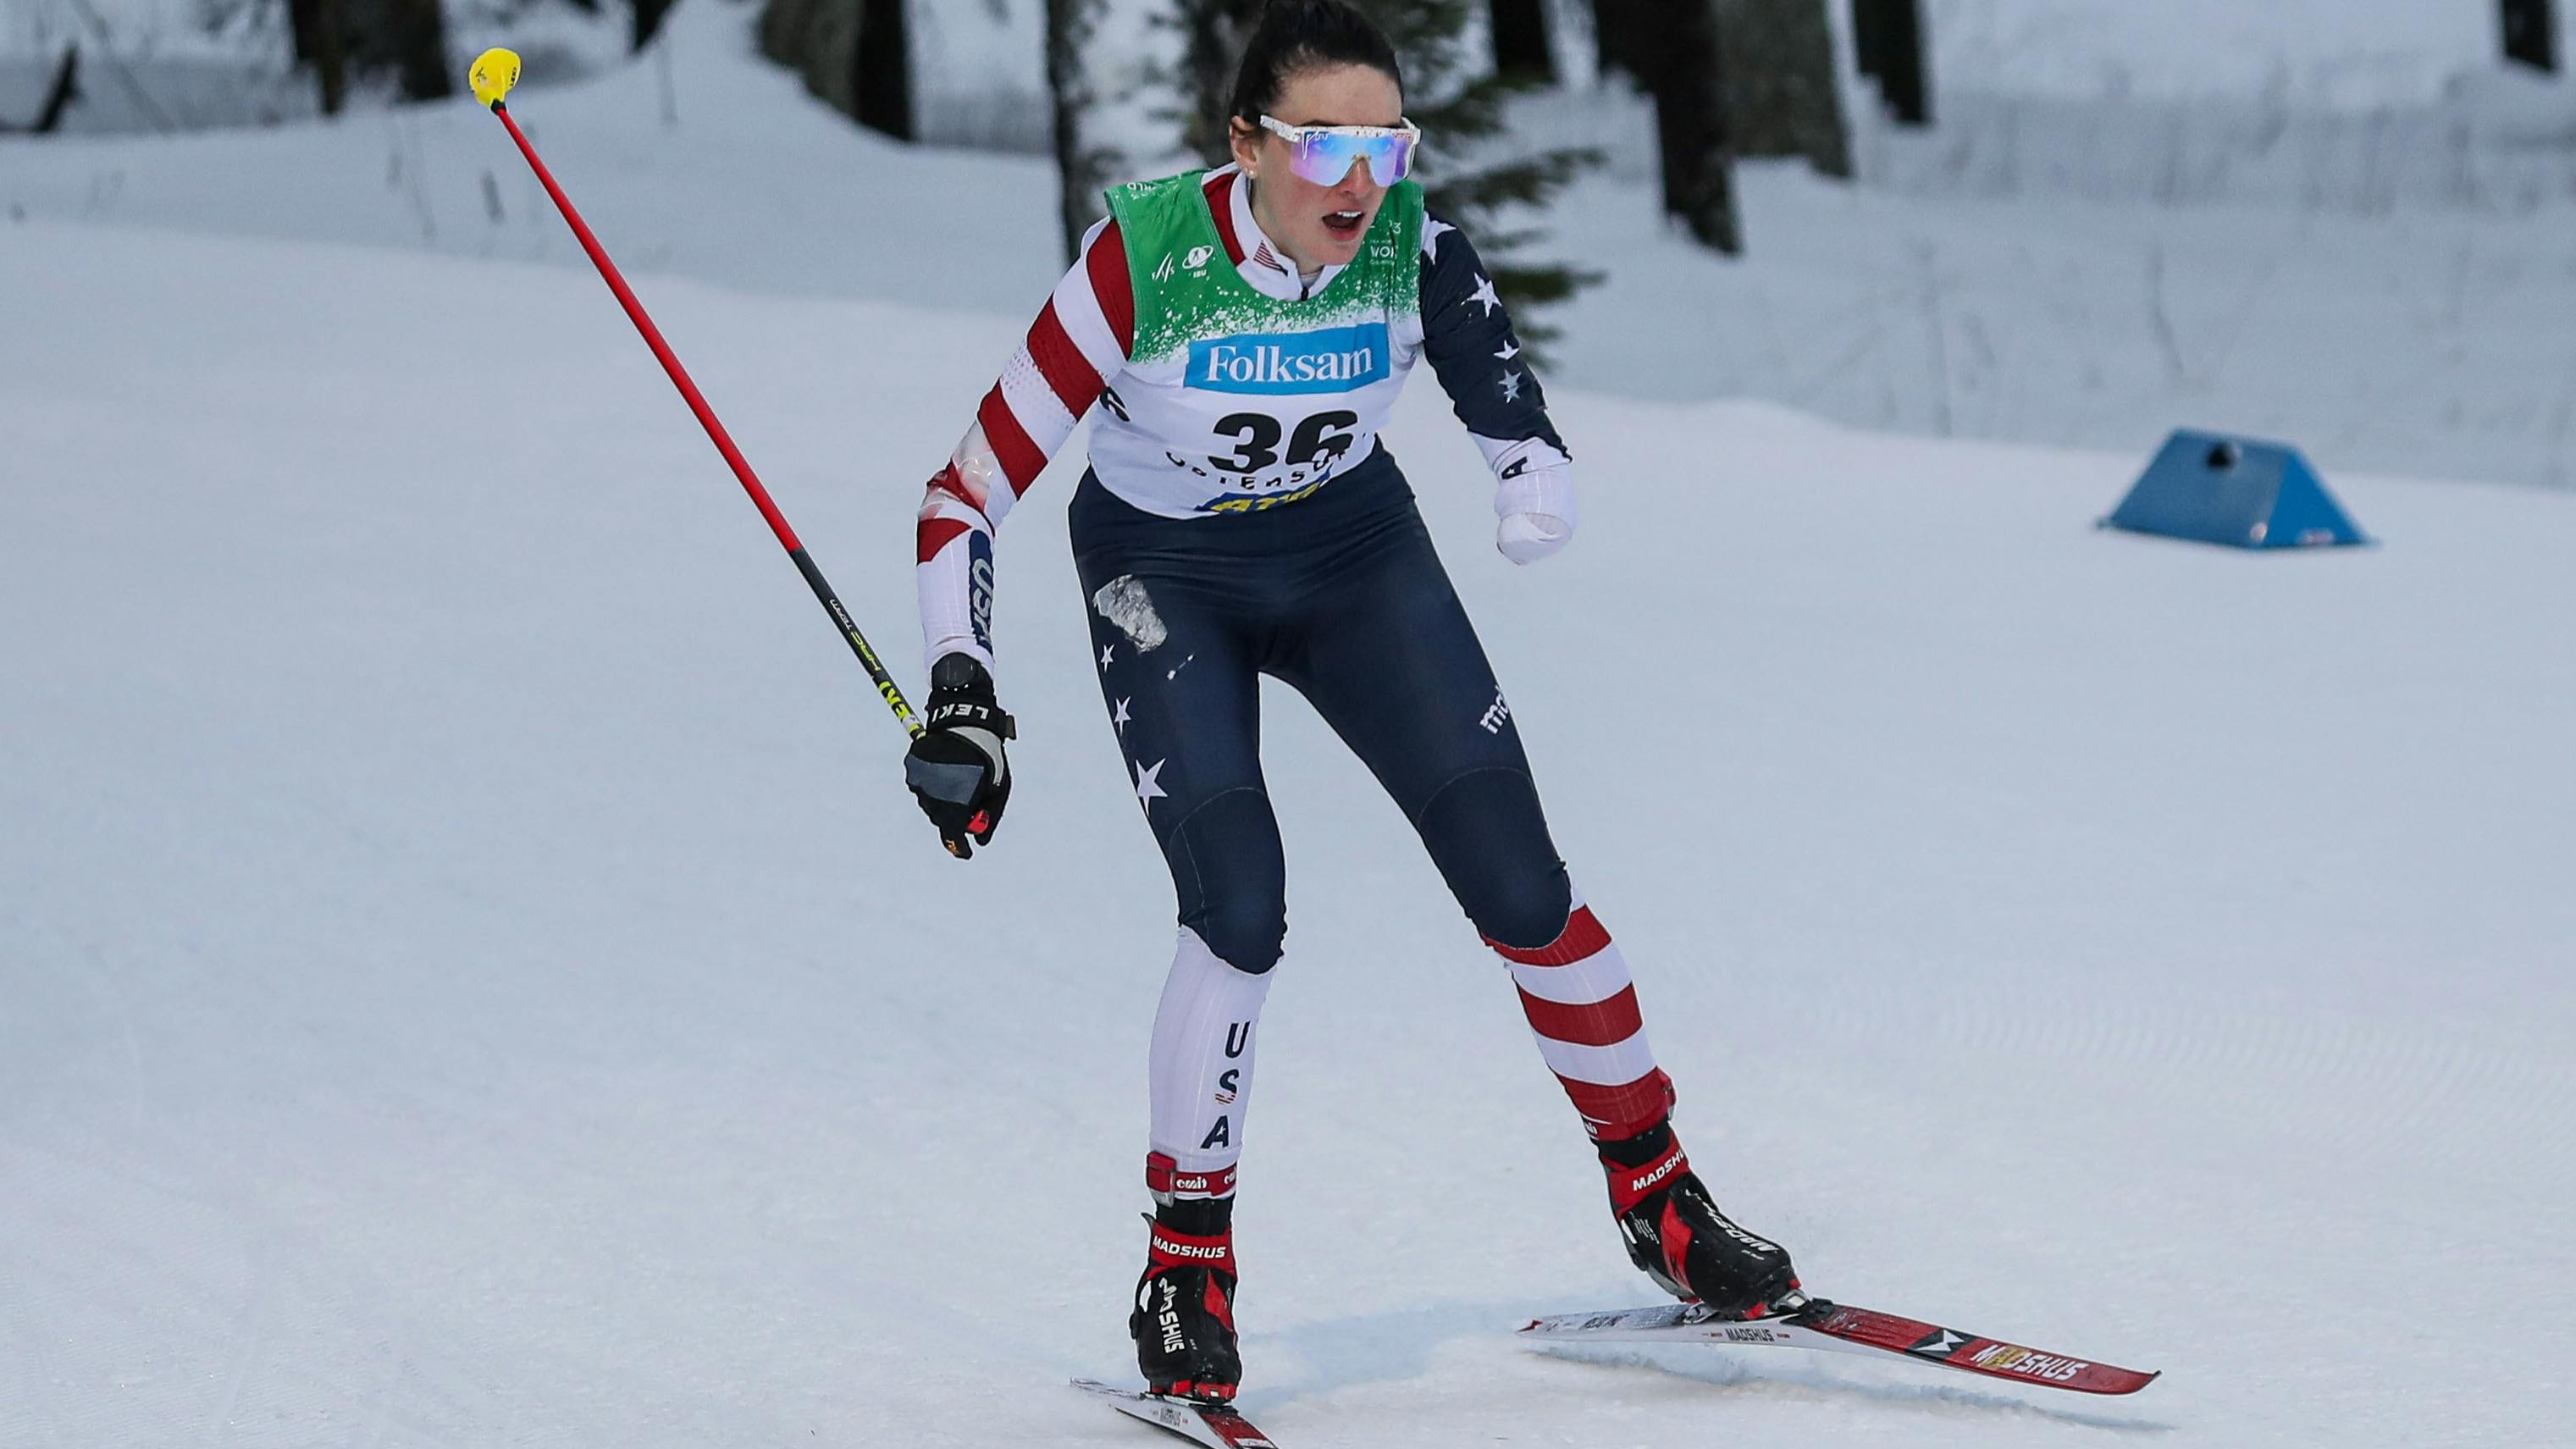 A nordic skier skis down a nordic track. She is wearing a speed suit that says "USA" and has an American flag print. She is only using one pole and is missing her left hand and forearm. 